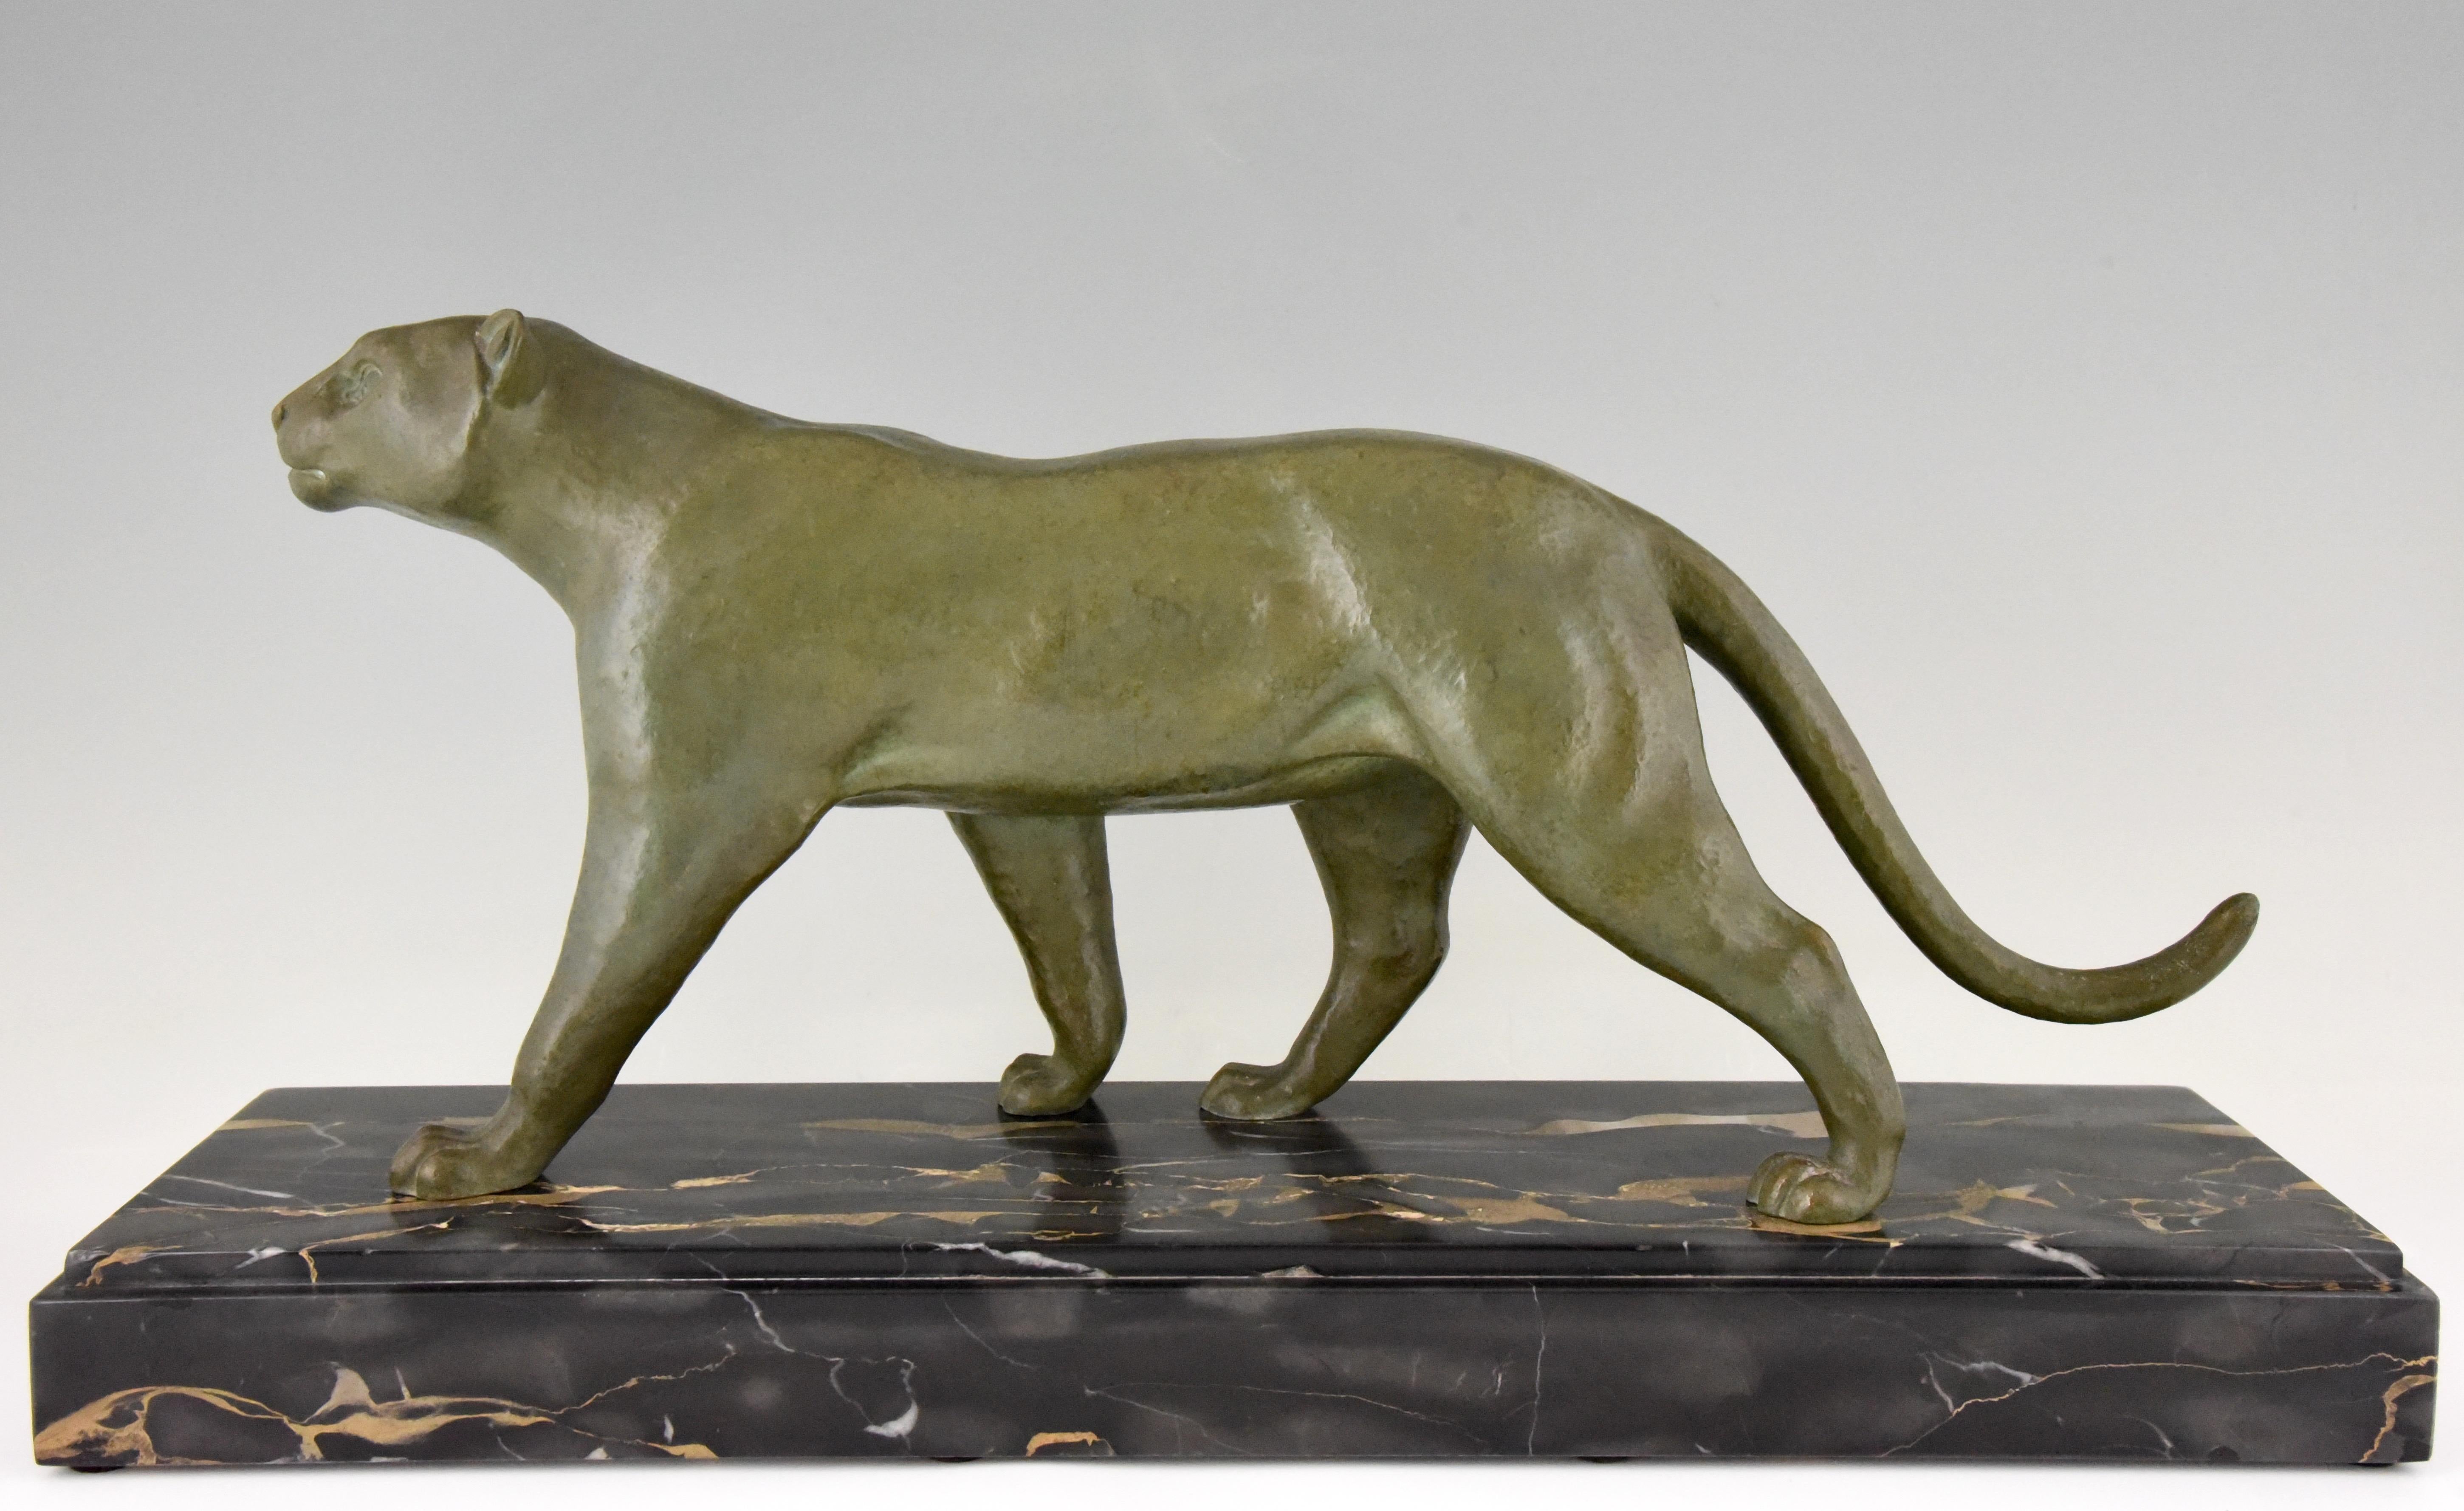 Art Deco bronze sculpture of a standing panther with green patina, mounted on a Portor marble base. Signed by the sculptor Alexandre Ouline, France, 1930.

Literature:
“Animals in bronze” by Christopher Payne. Antique collectors club.